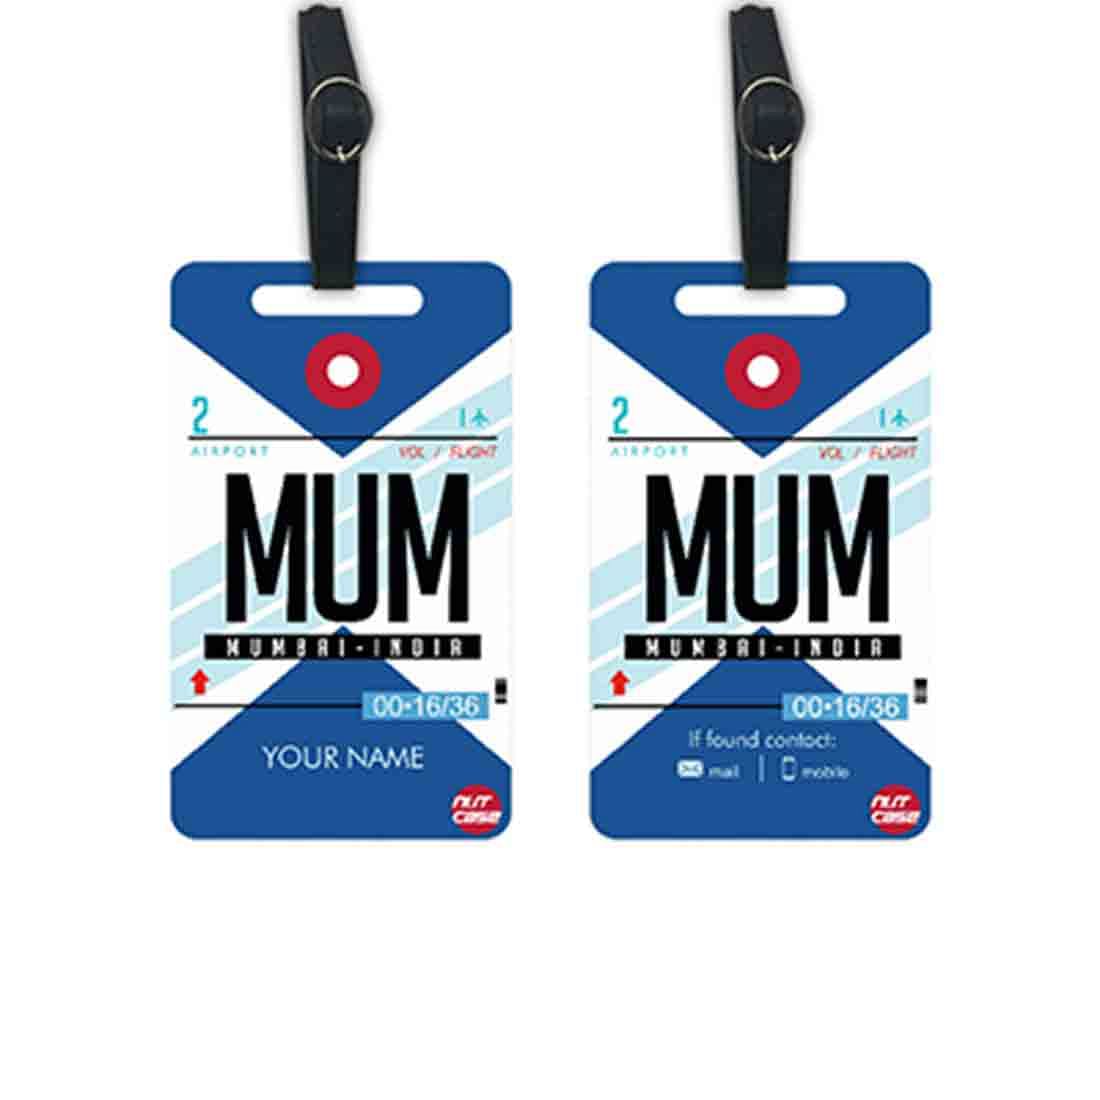 Classy Customized Luggage Baggage Tag - Add your Name - Set of 2 Nutcase